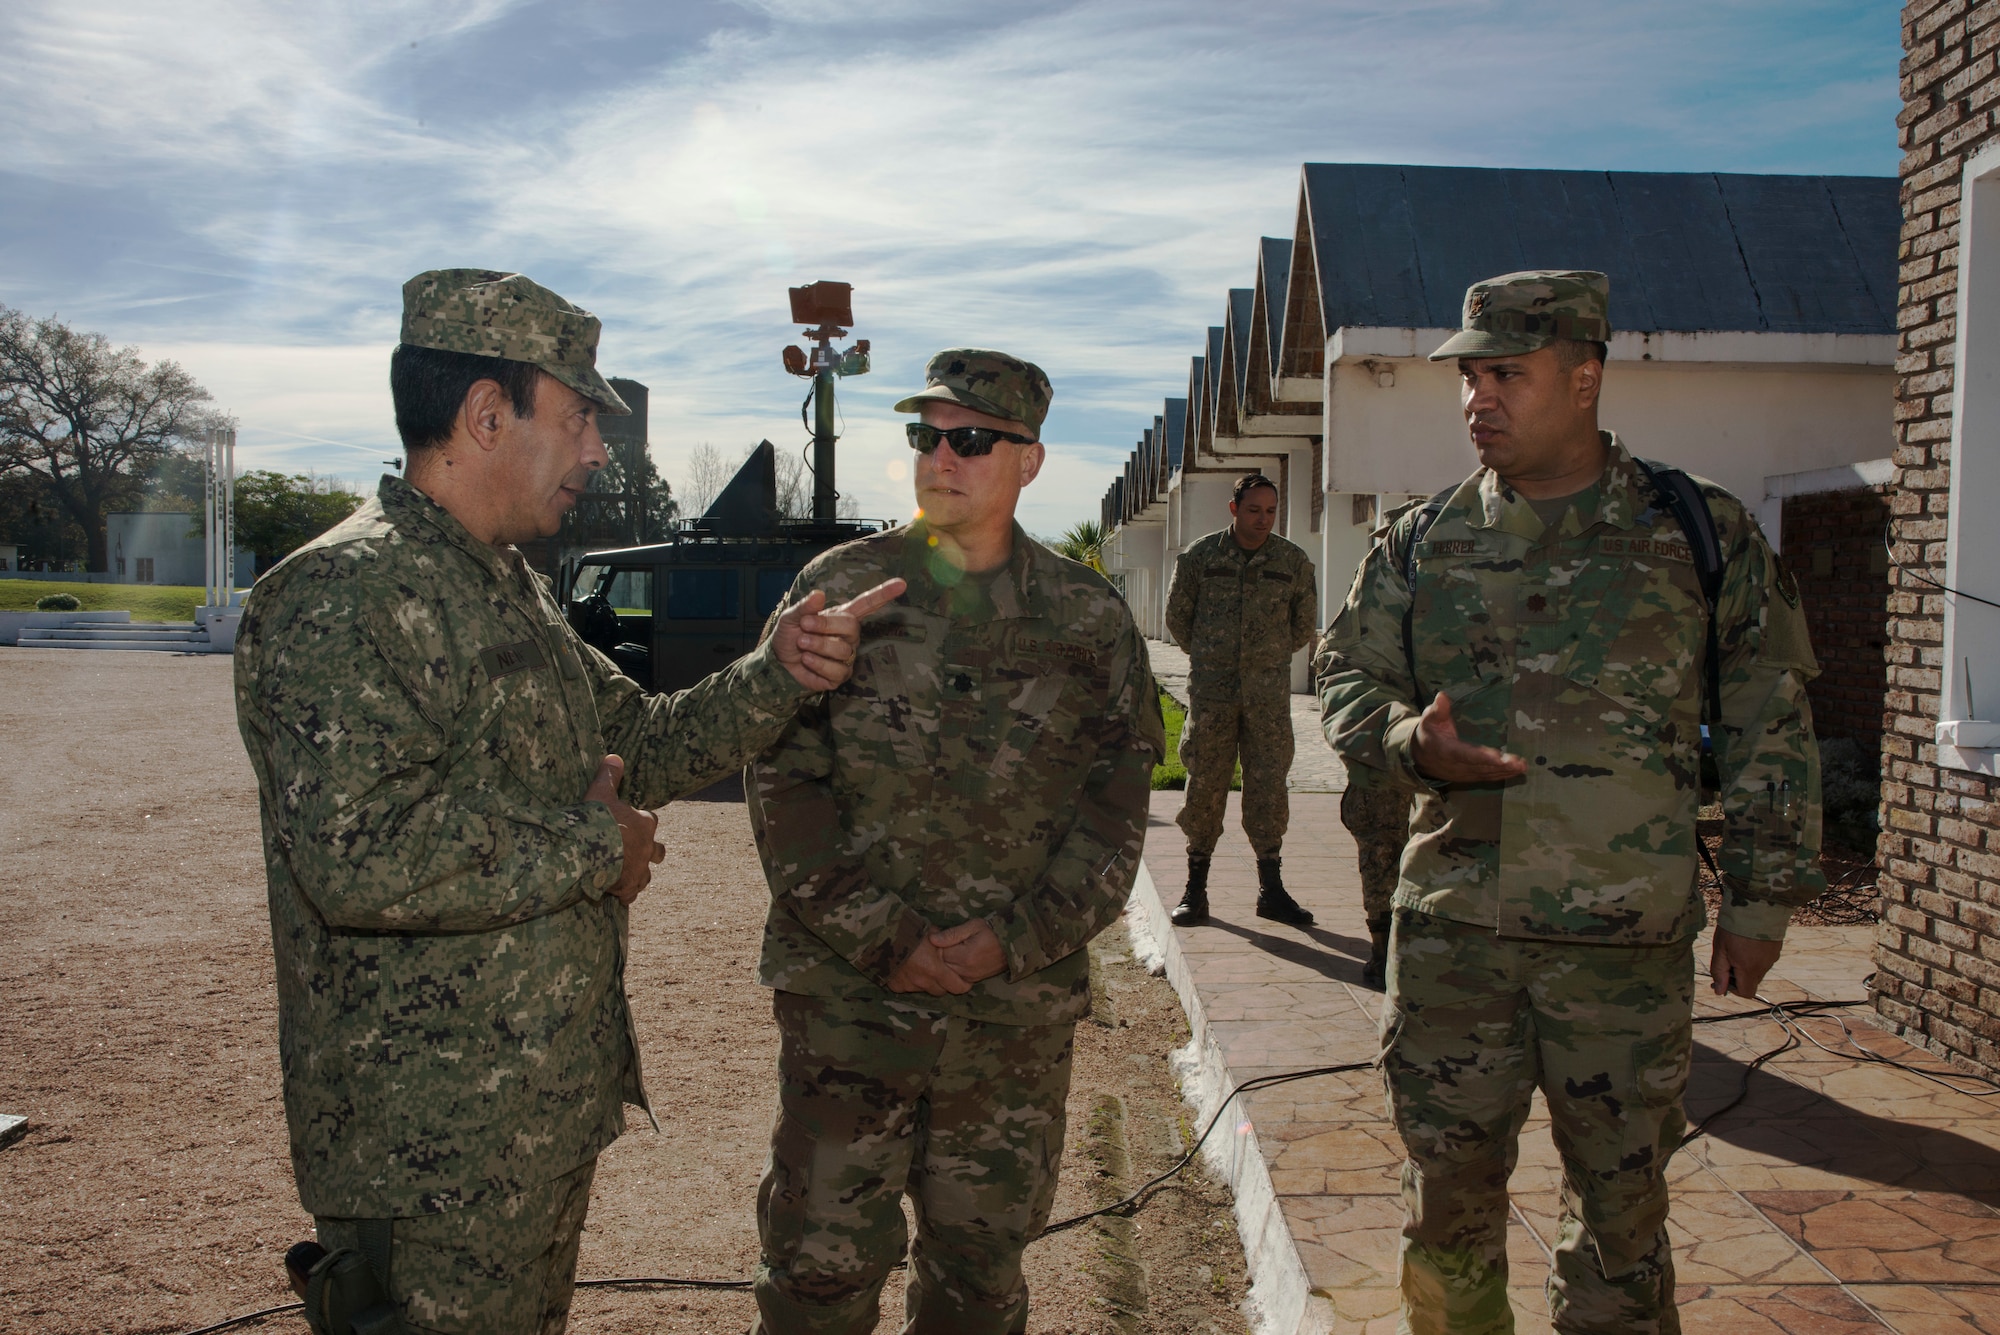 Uruguayan Army Colonel Dyver M. Neme, Communications Brigade One Commander (left), discusses the Uruguayan Army's communications capabilities with Lt. Col. Guy Marino, 103rd Air Control Squadron (center) and Maj. David Ferrer, Connecticut State Partnership Program Director (right) in Montevideo, Uruguay, June 27, 2019. One of the main purposes of this State Partnership Program visit for the Connecticut National Guard to assess Uruguay's joint military operability. (U.S. Air National Guard photo by Capt. Jen Pierce)